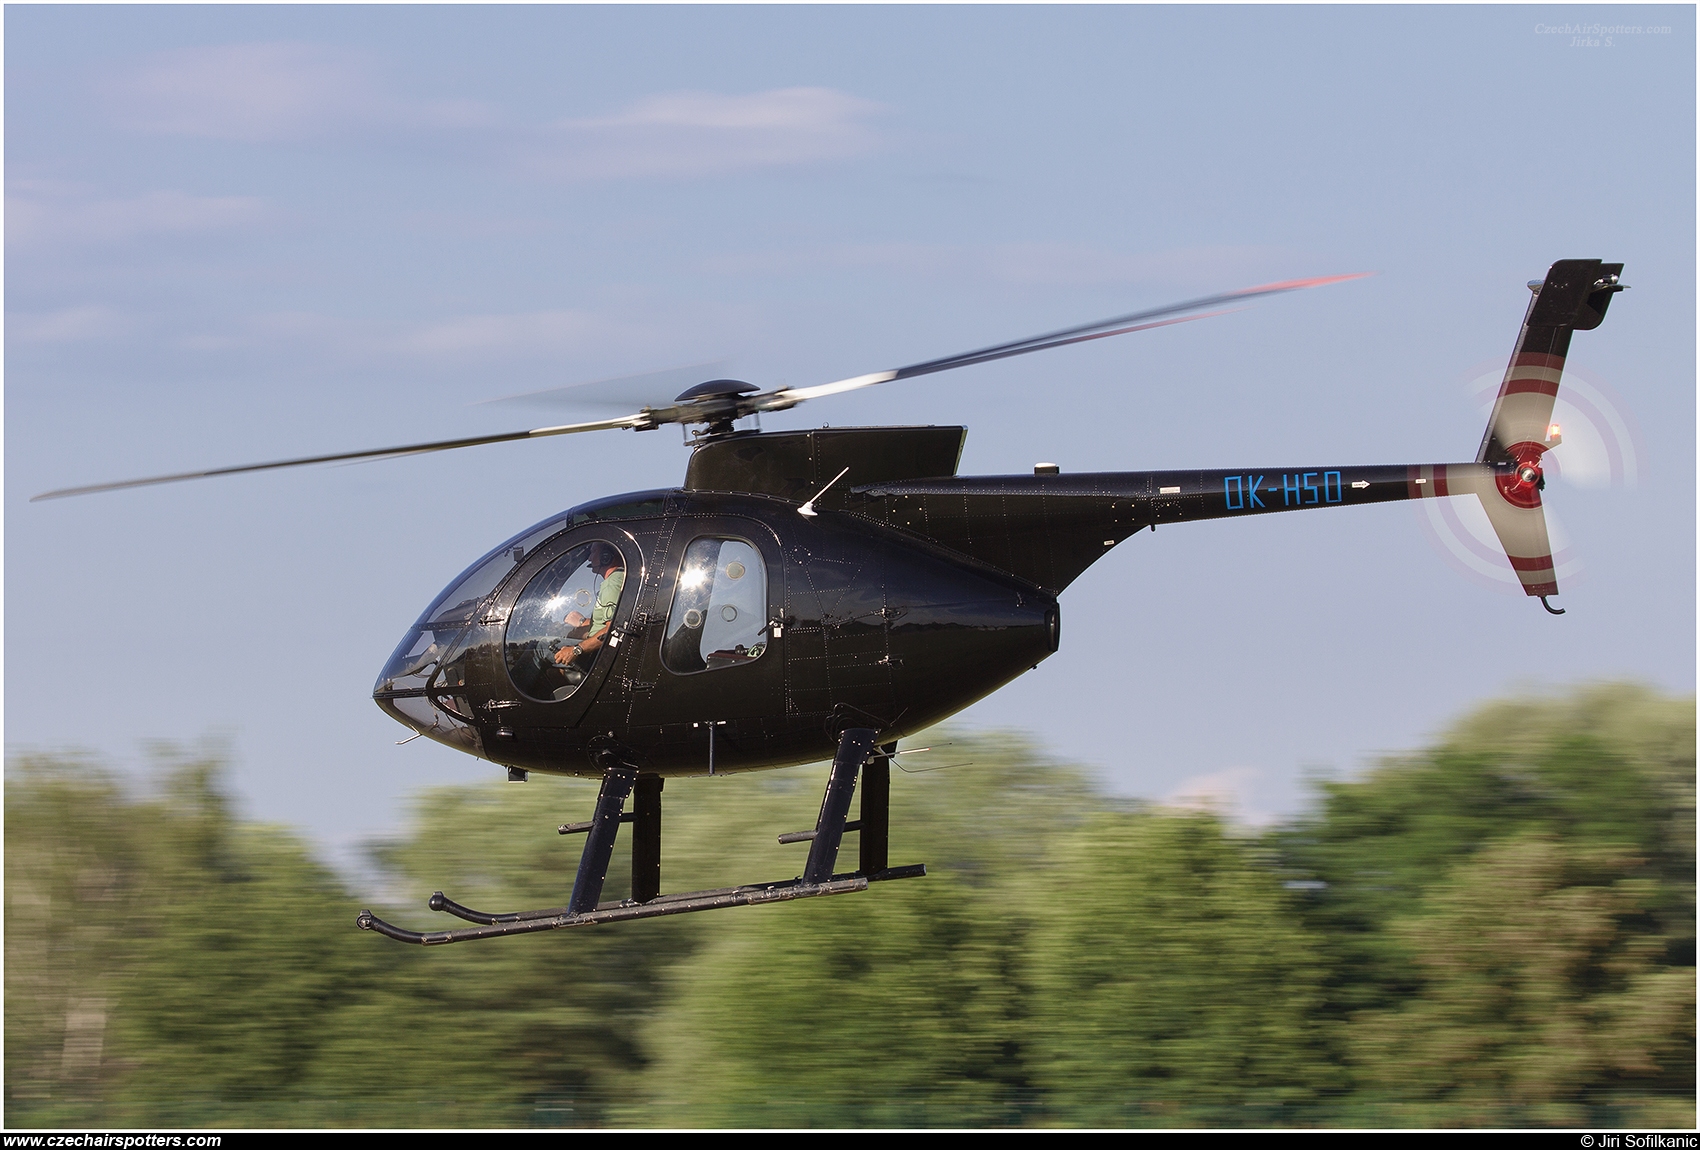 EUROPEAN AIR SERVICES – MD Helicopters MD 500E (369E) OK-HSO